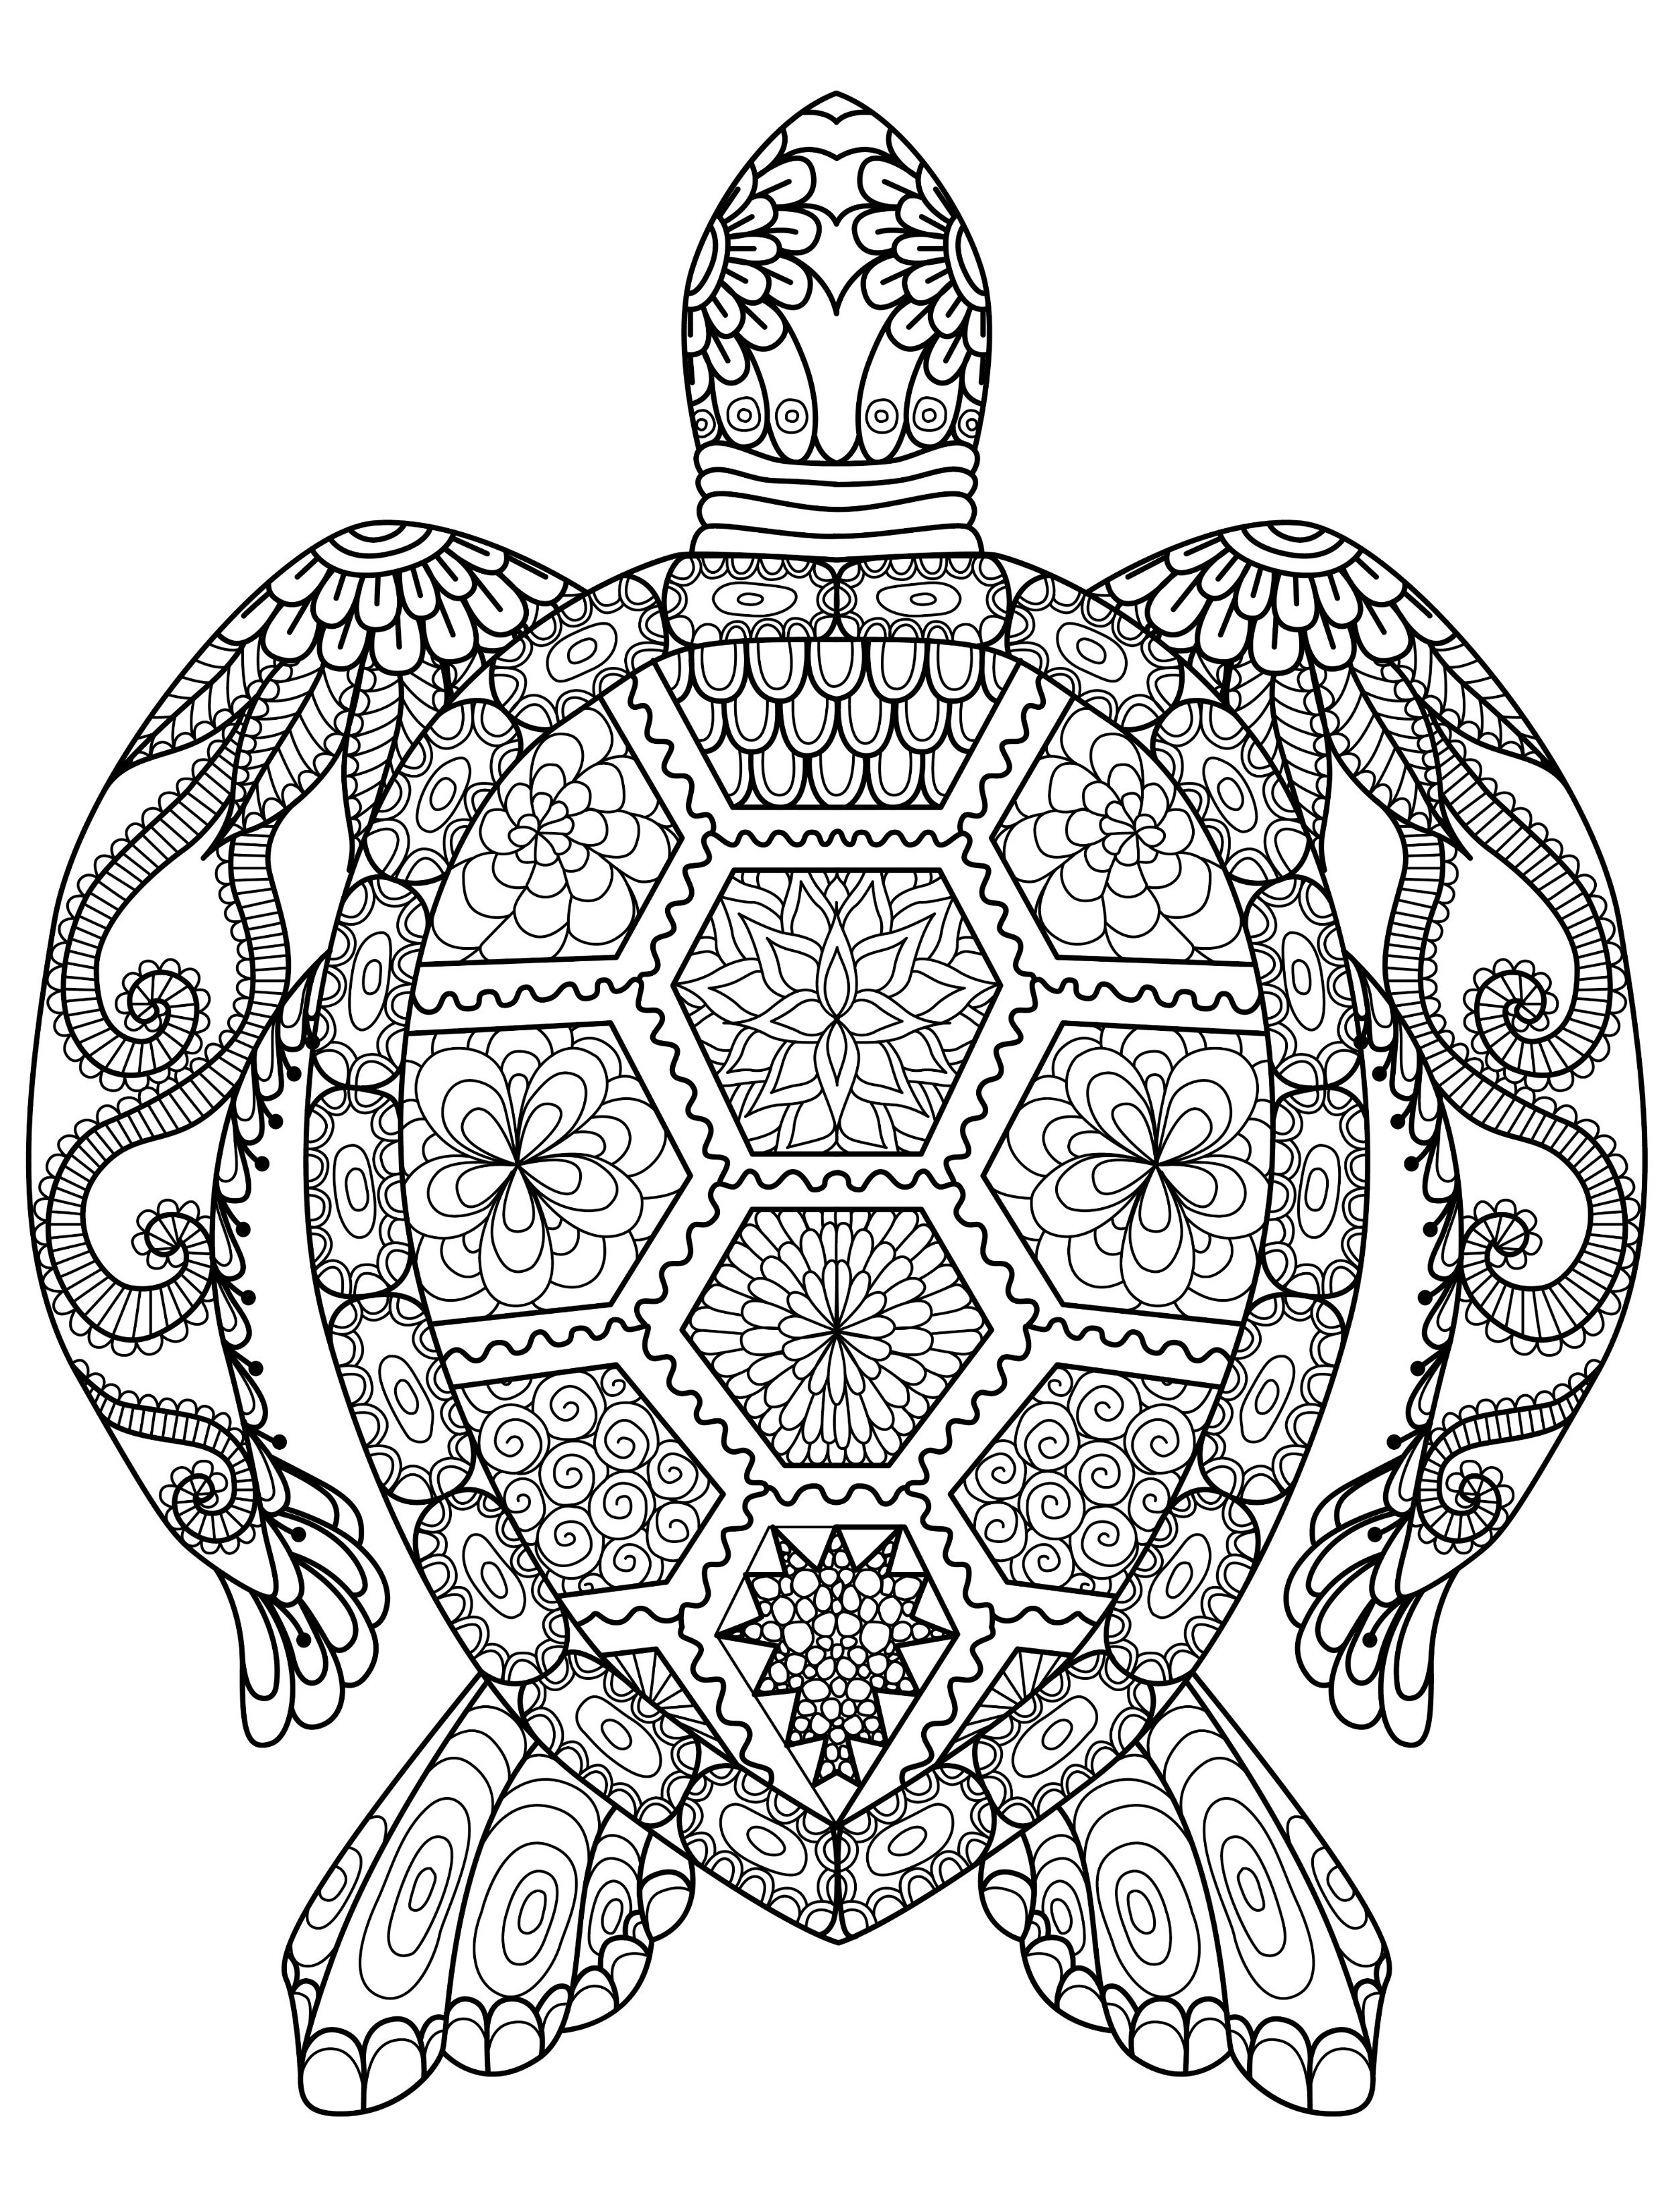 Animal Kingdom Coloring Pages at GetDrawings | Free download